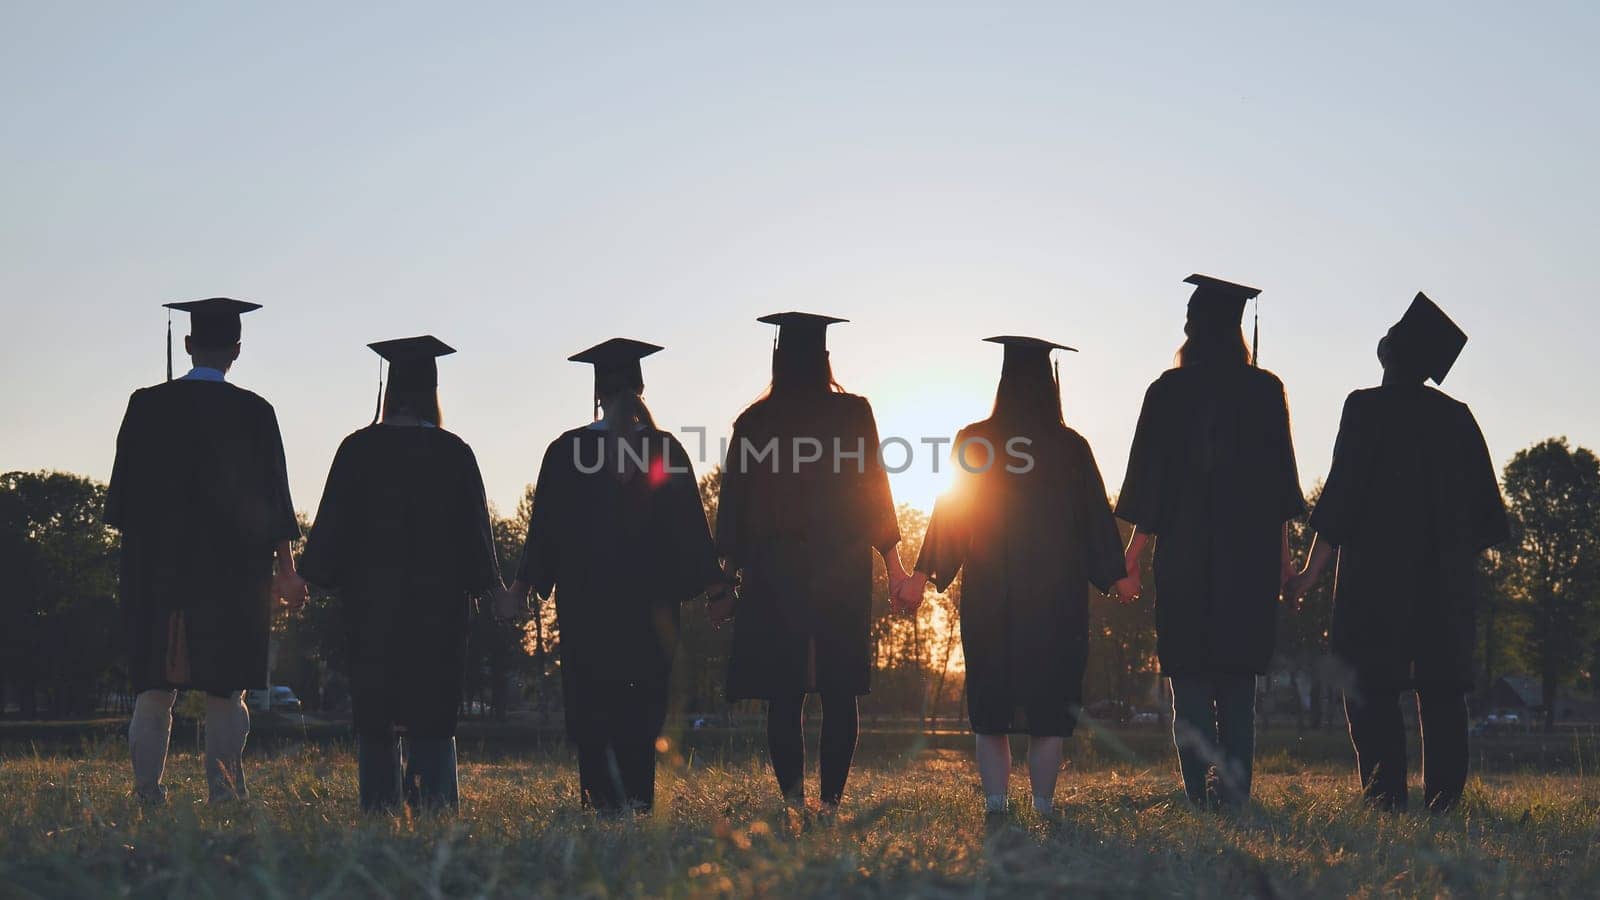 Silhouettes of college graduates standing in a meadow